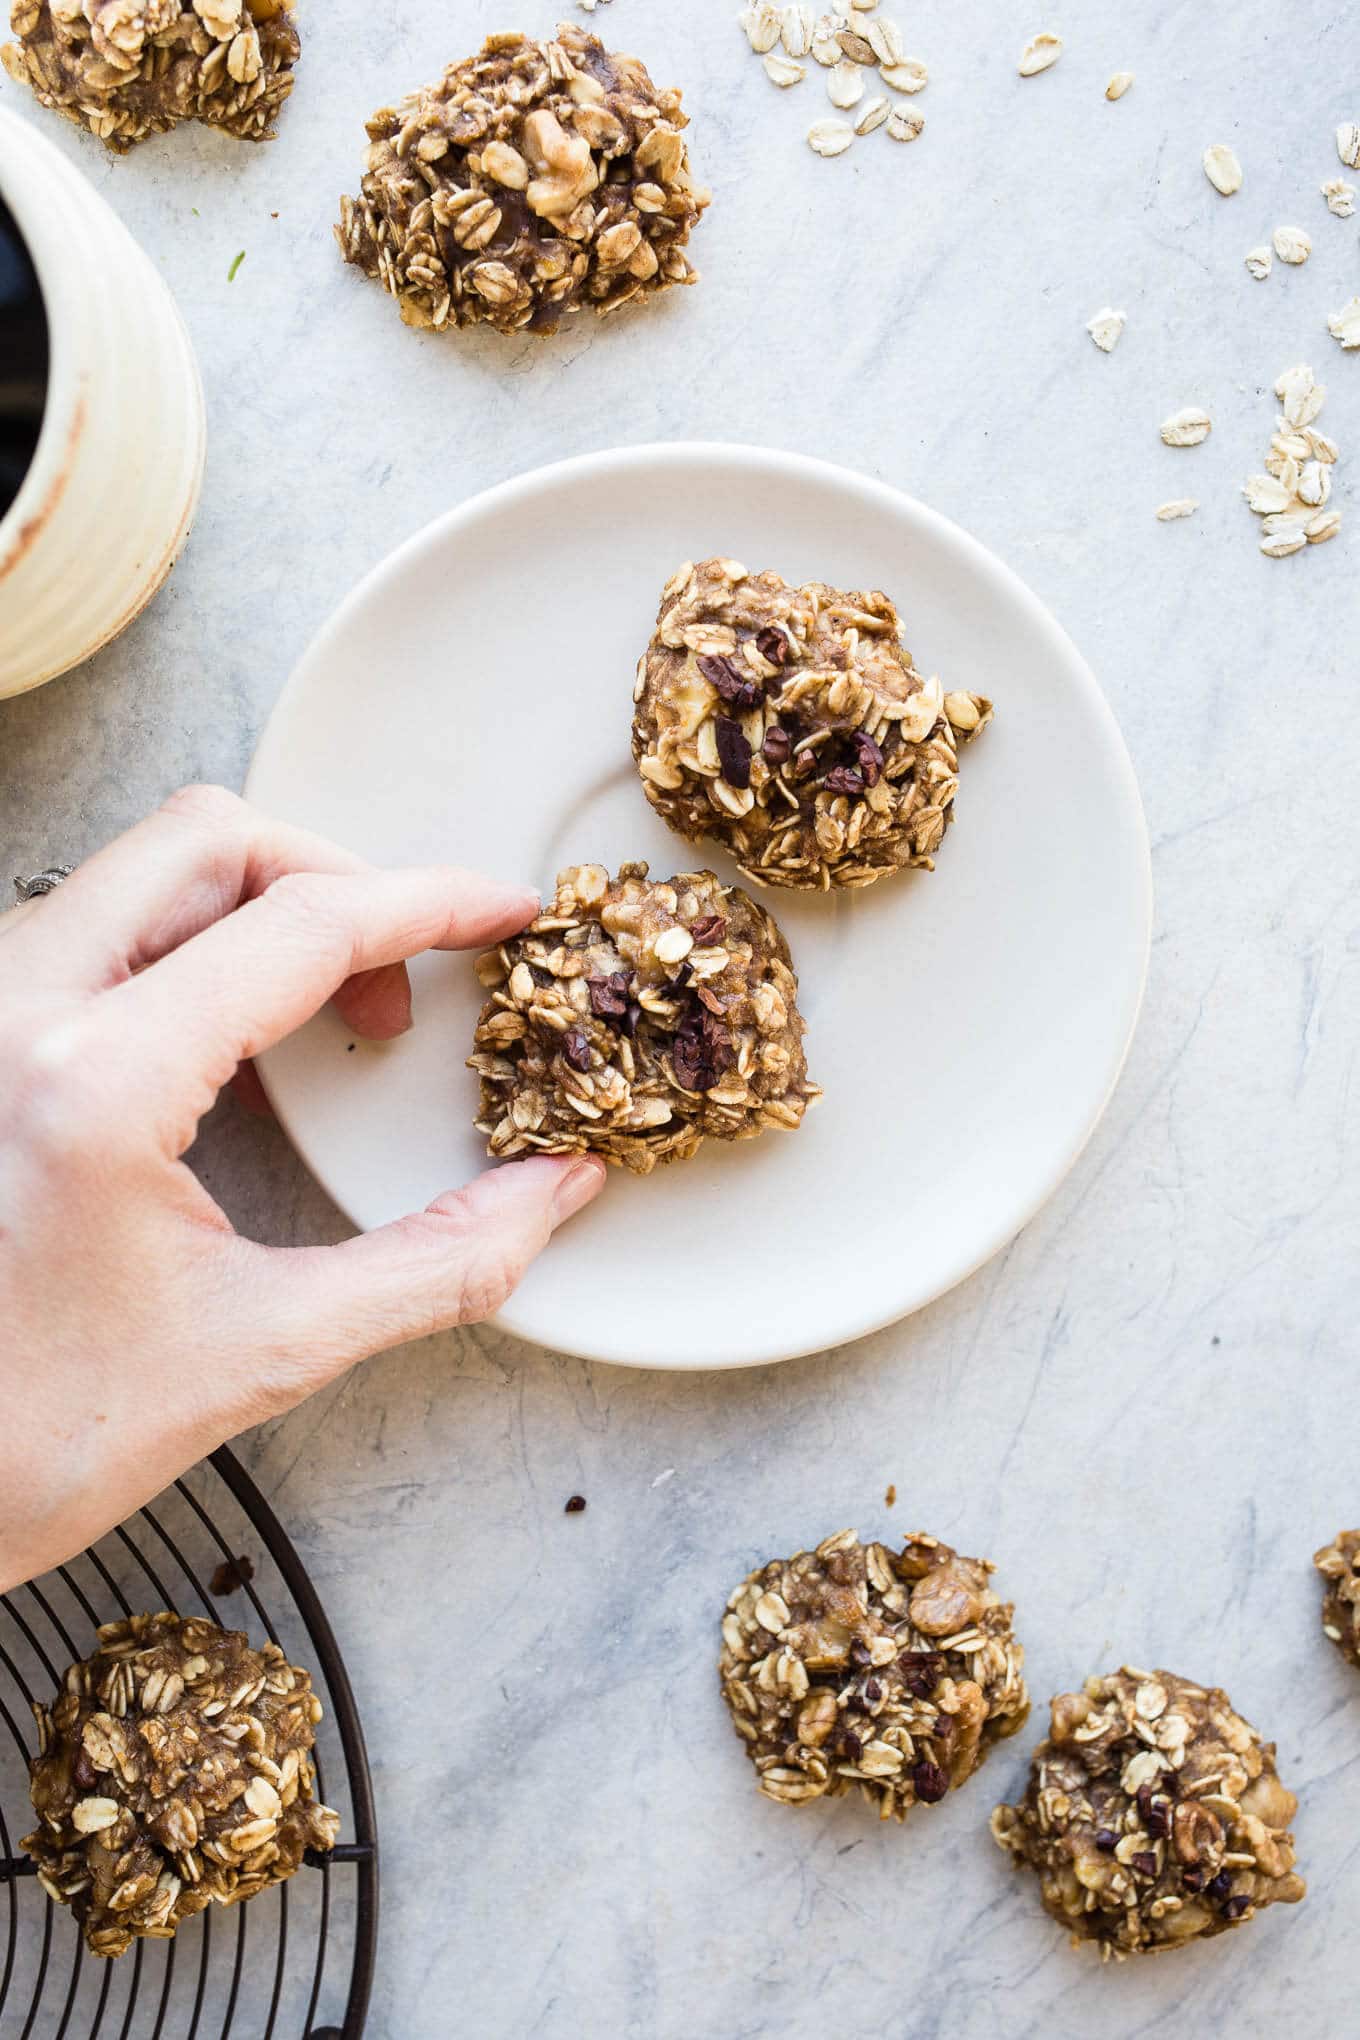 4-Ingredient Banana Bread Cookies with walnuts and cacao nibs are naturally sweetened for a healthy cookie perfect for breakfast, snack, or dessert! Gluten-free, vegan. 